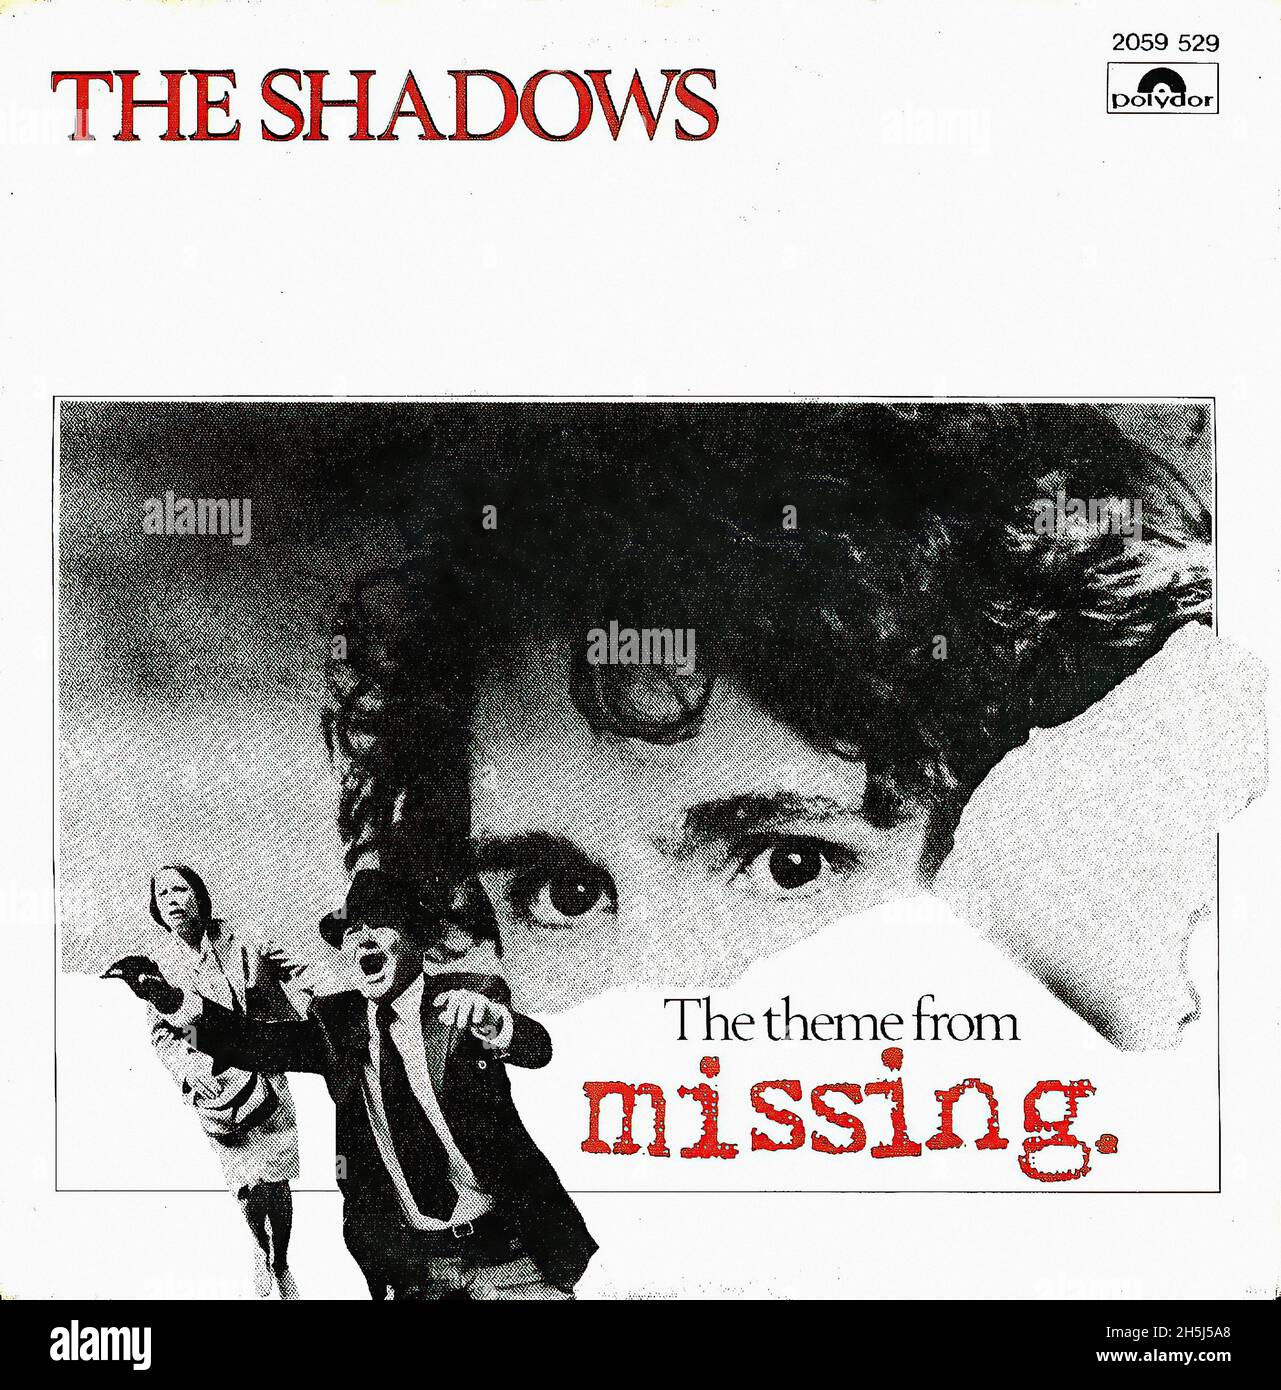 Copertina singola vintage - Missing - Vermisst - Theme from Missing - The Shadows - D - 1982 02 Foto Stock